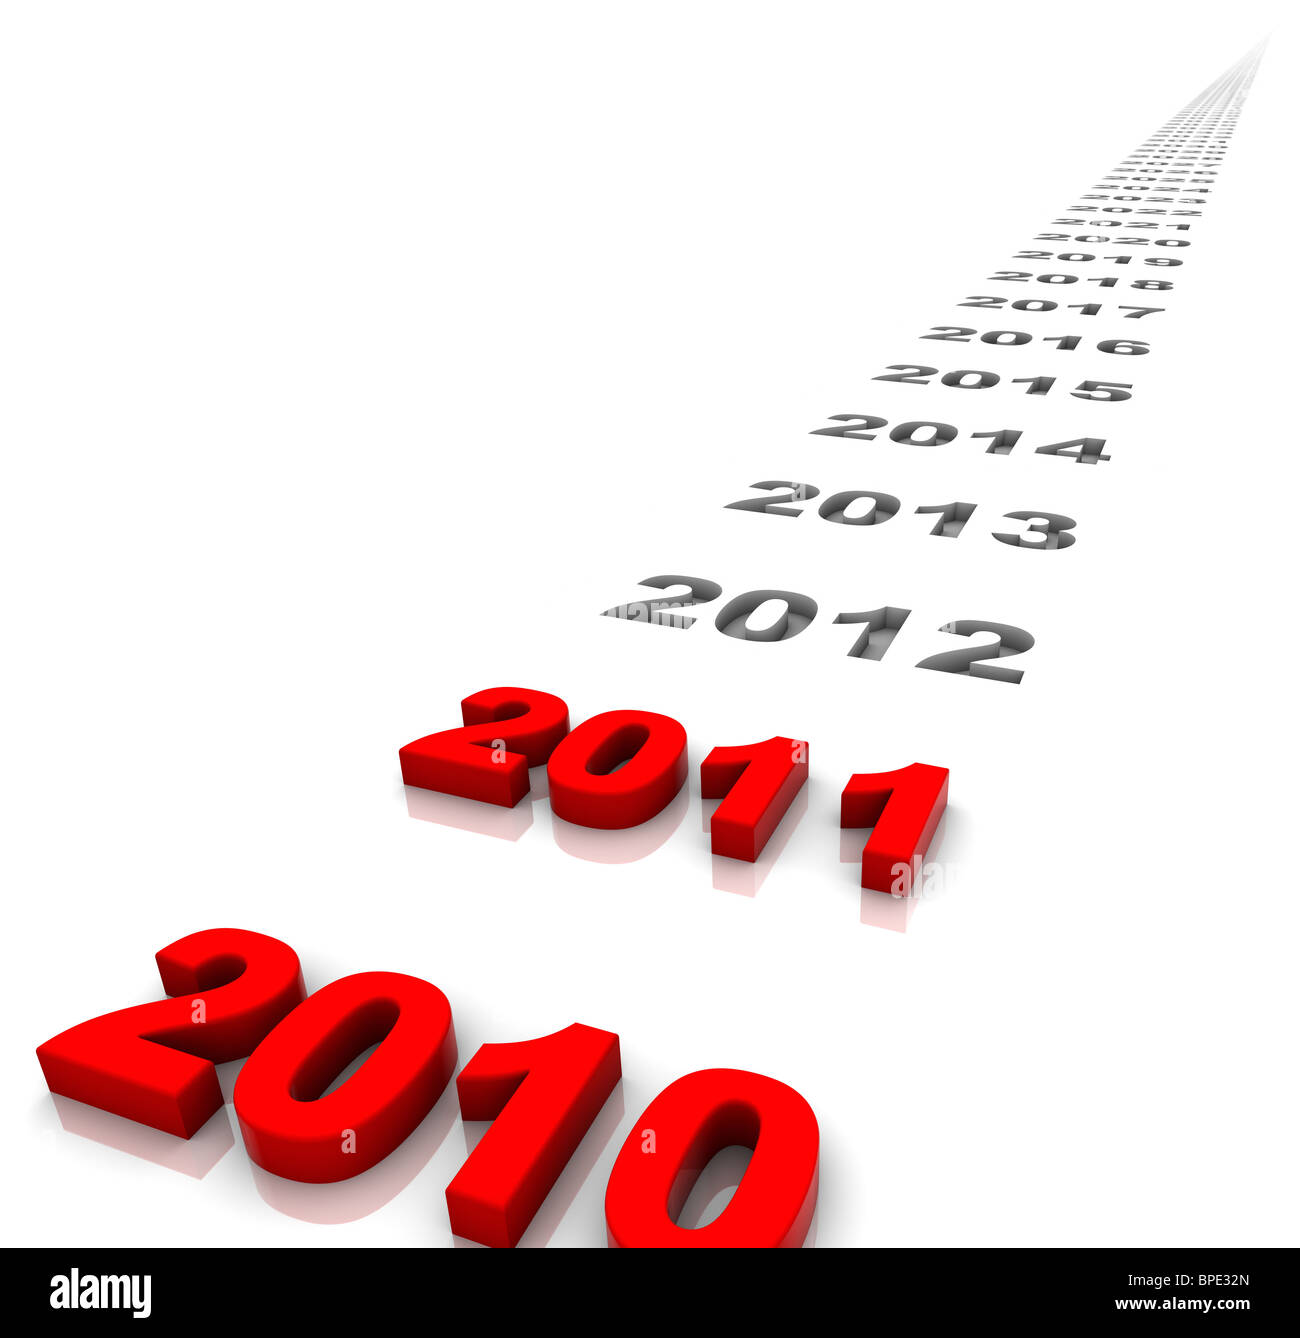 New year 2011 and the years ahead. Part of a series. Stock Photo